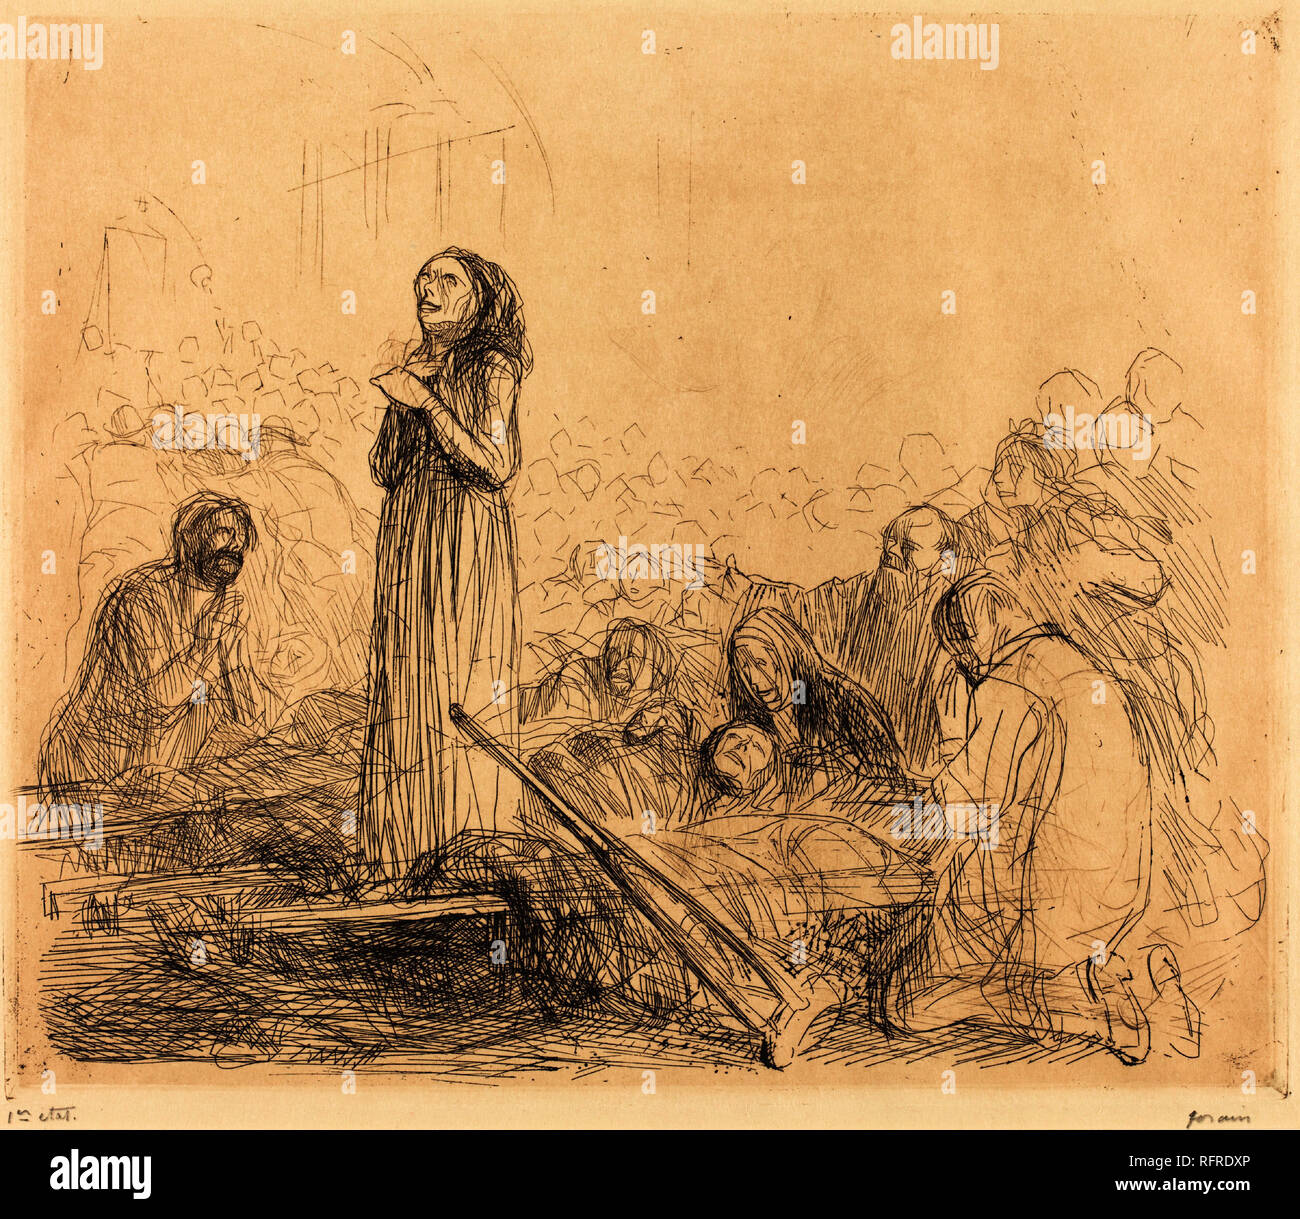 Lourdes, the Miracle (first plate). Dated: 1912/1913. Medium: etching in dark brown ink. Museum: National Gallery of Art, Washington DC. Author: FORAIN, JEAN LOUIS. Stock Photo